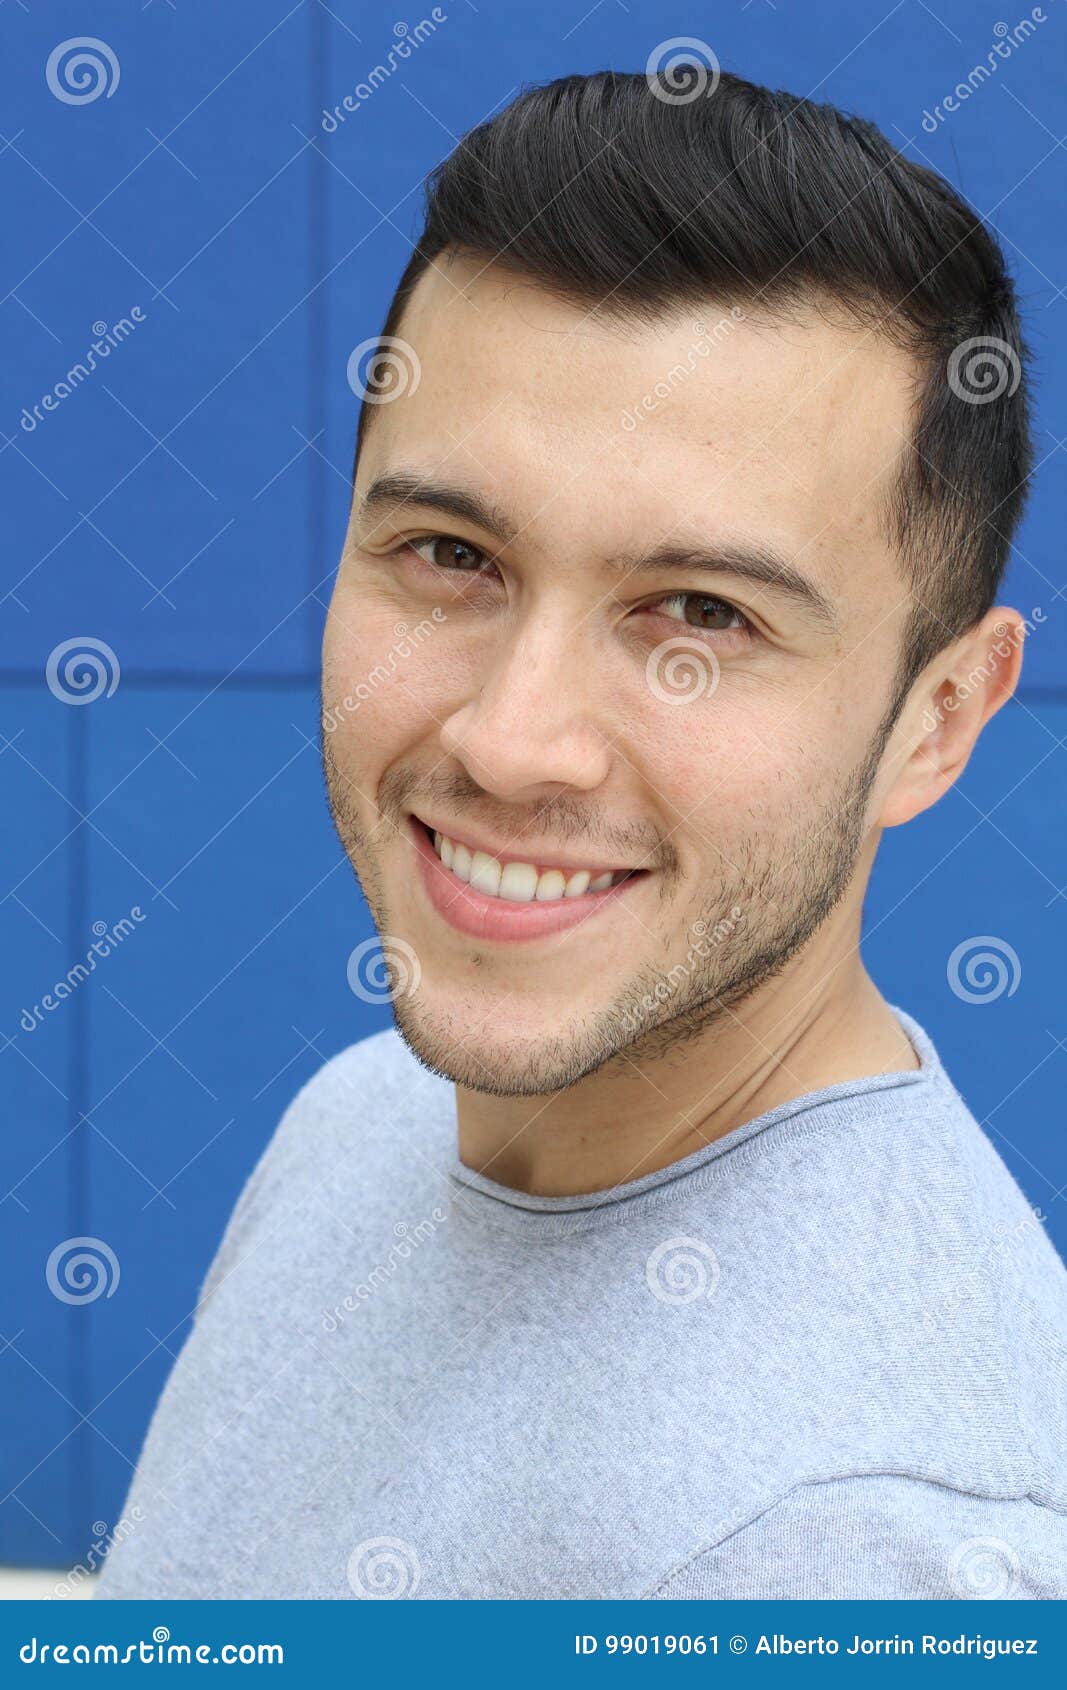 ethnically ambiguous male smiling close up